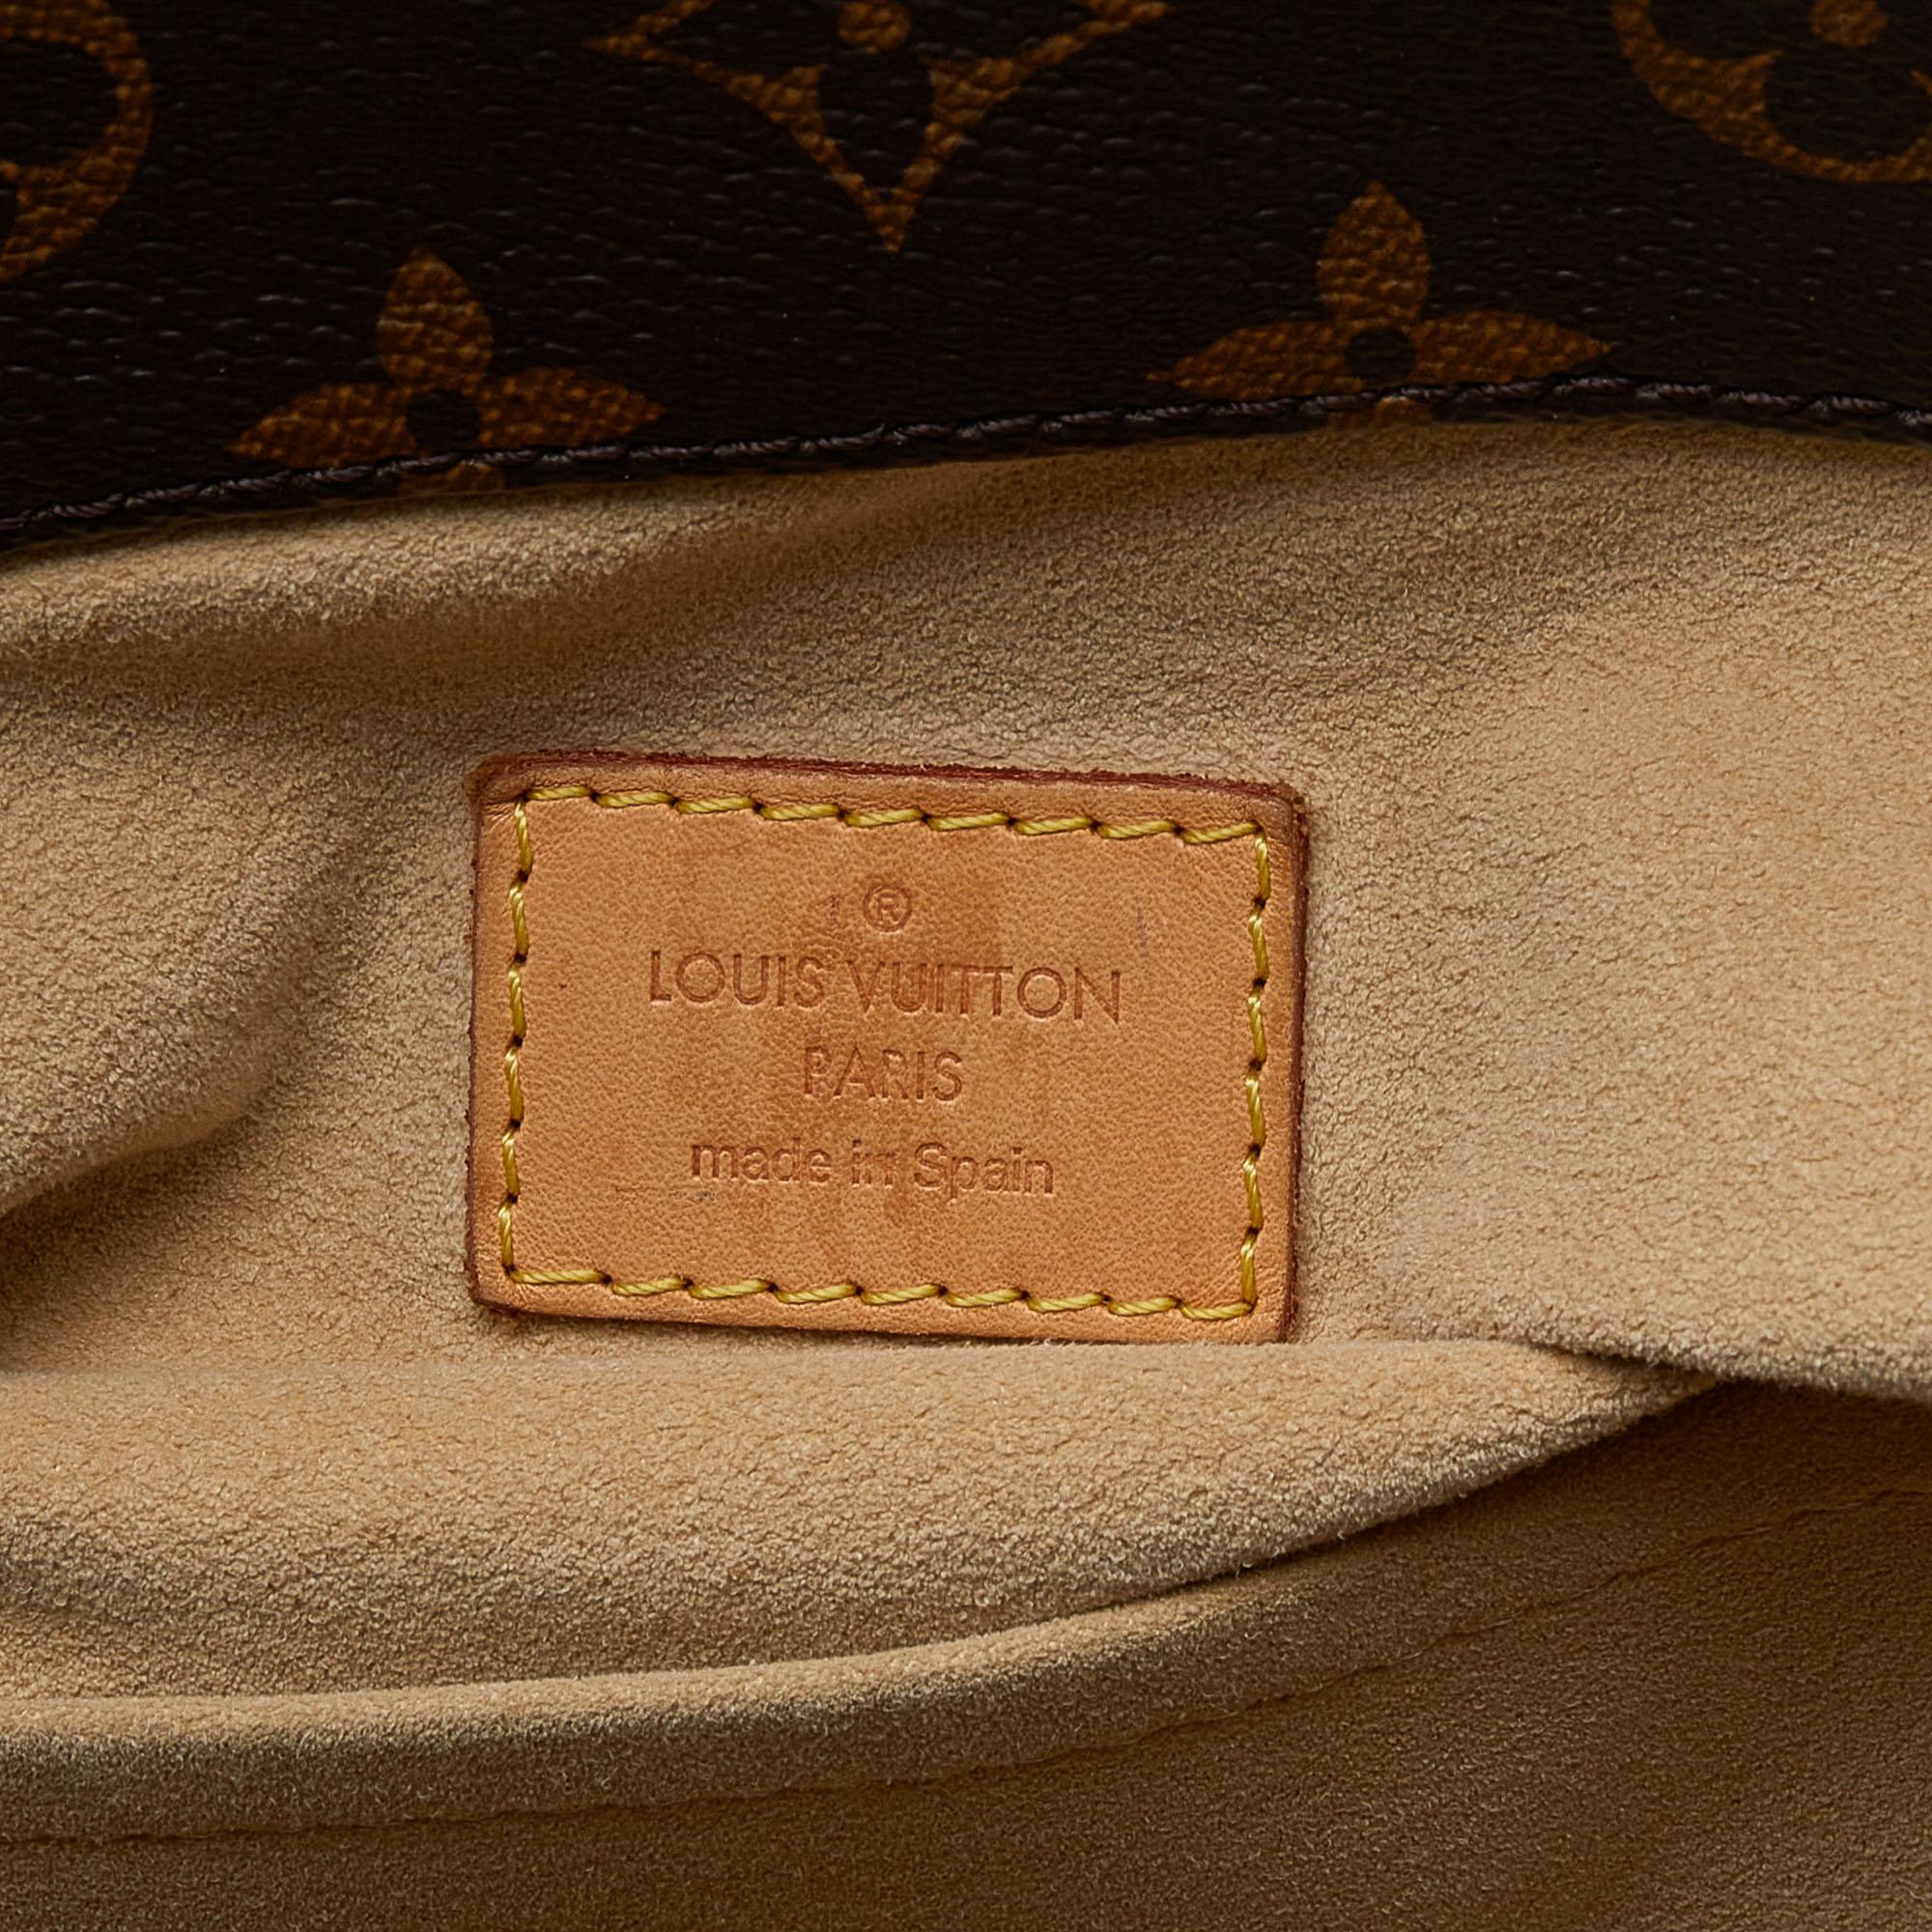 Louis Vuitton Monogram Canvas and Leather Artsy MM Bag 3